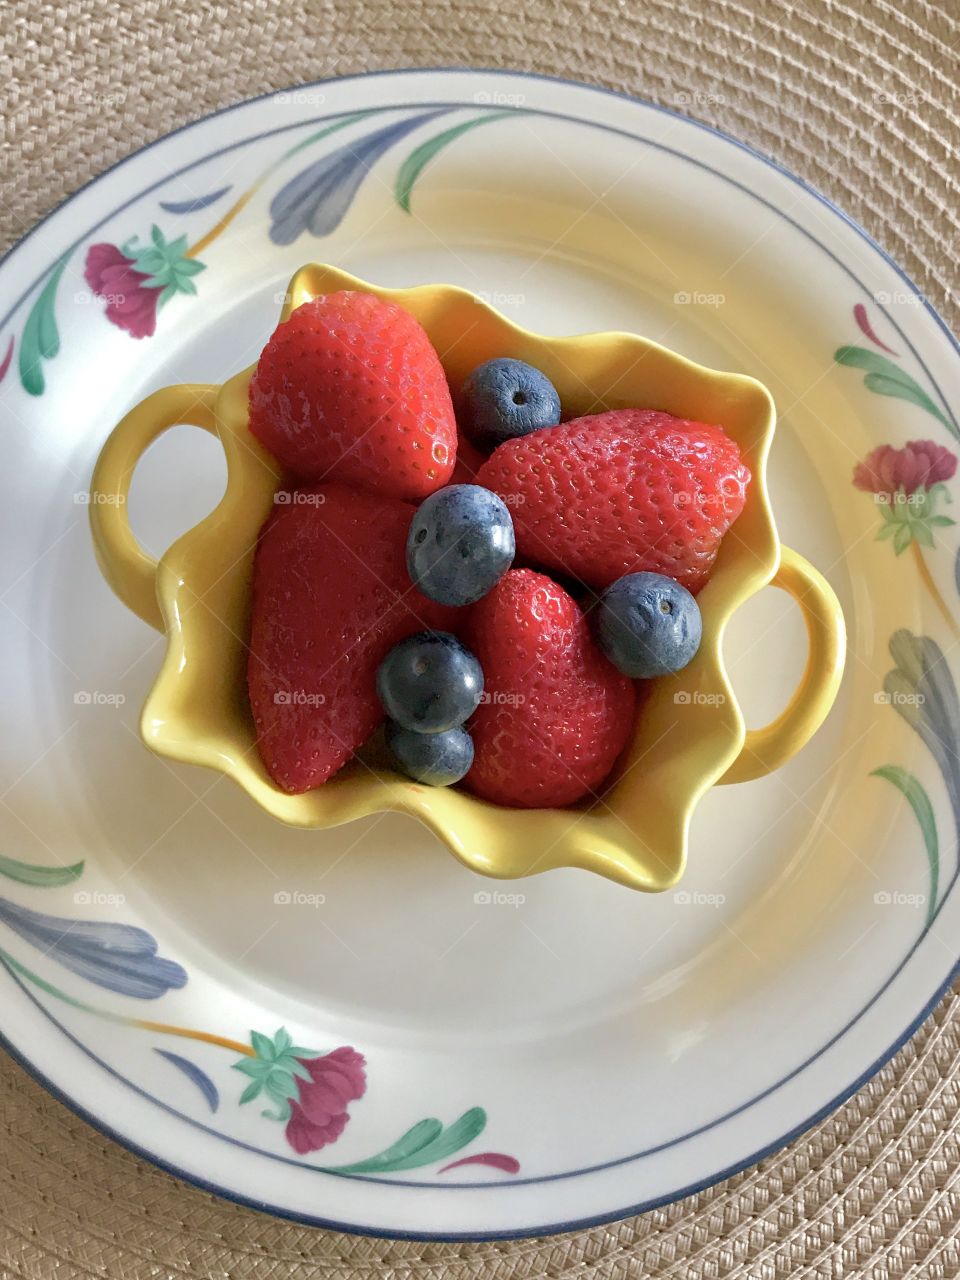 Serving of whole fruit 